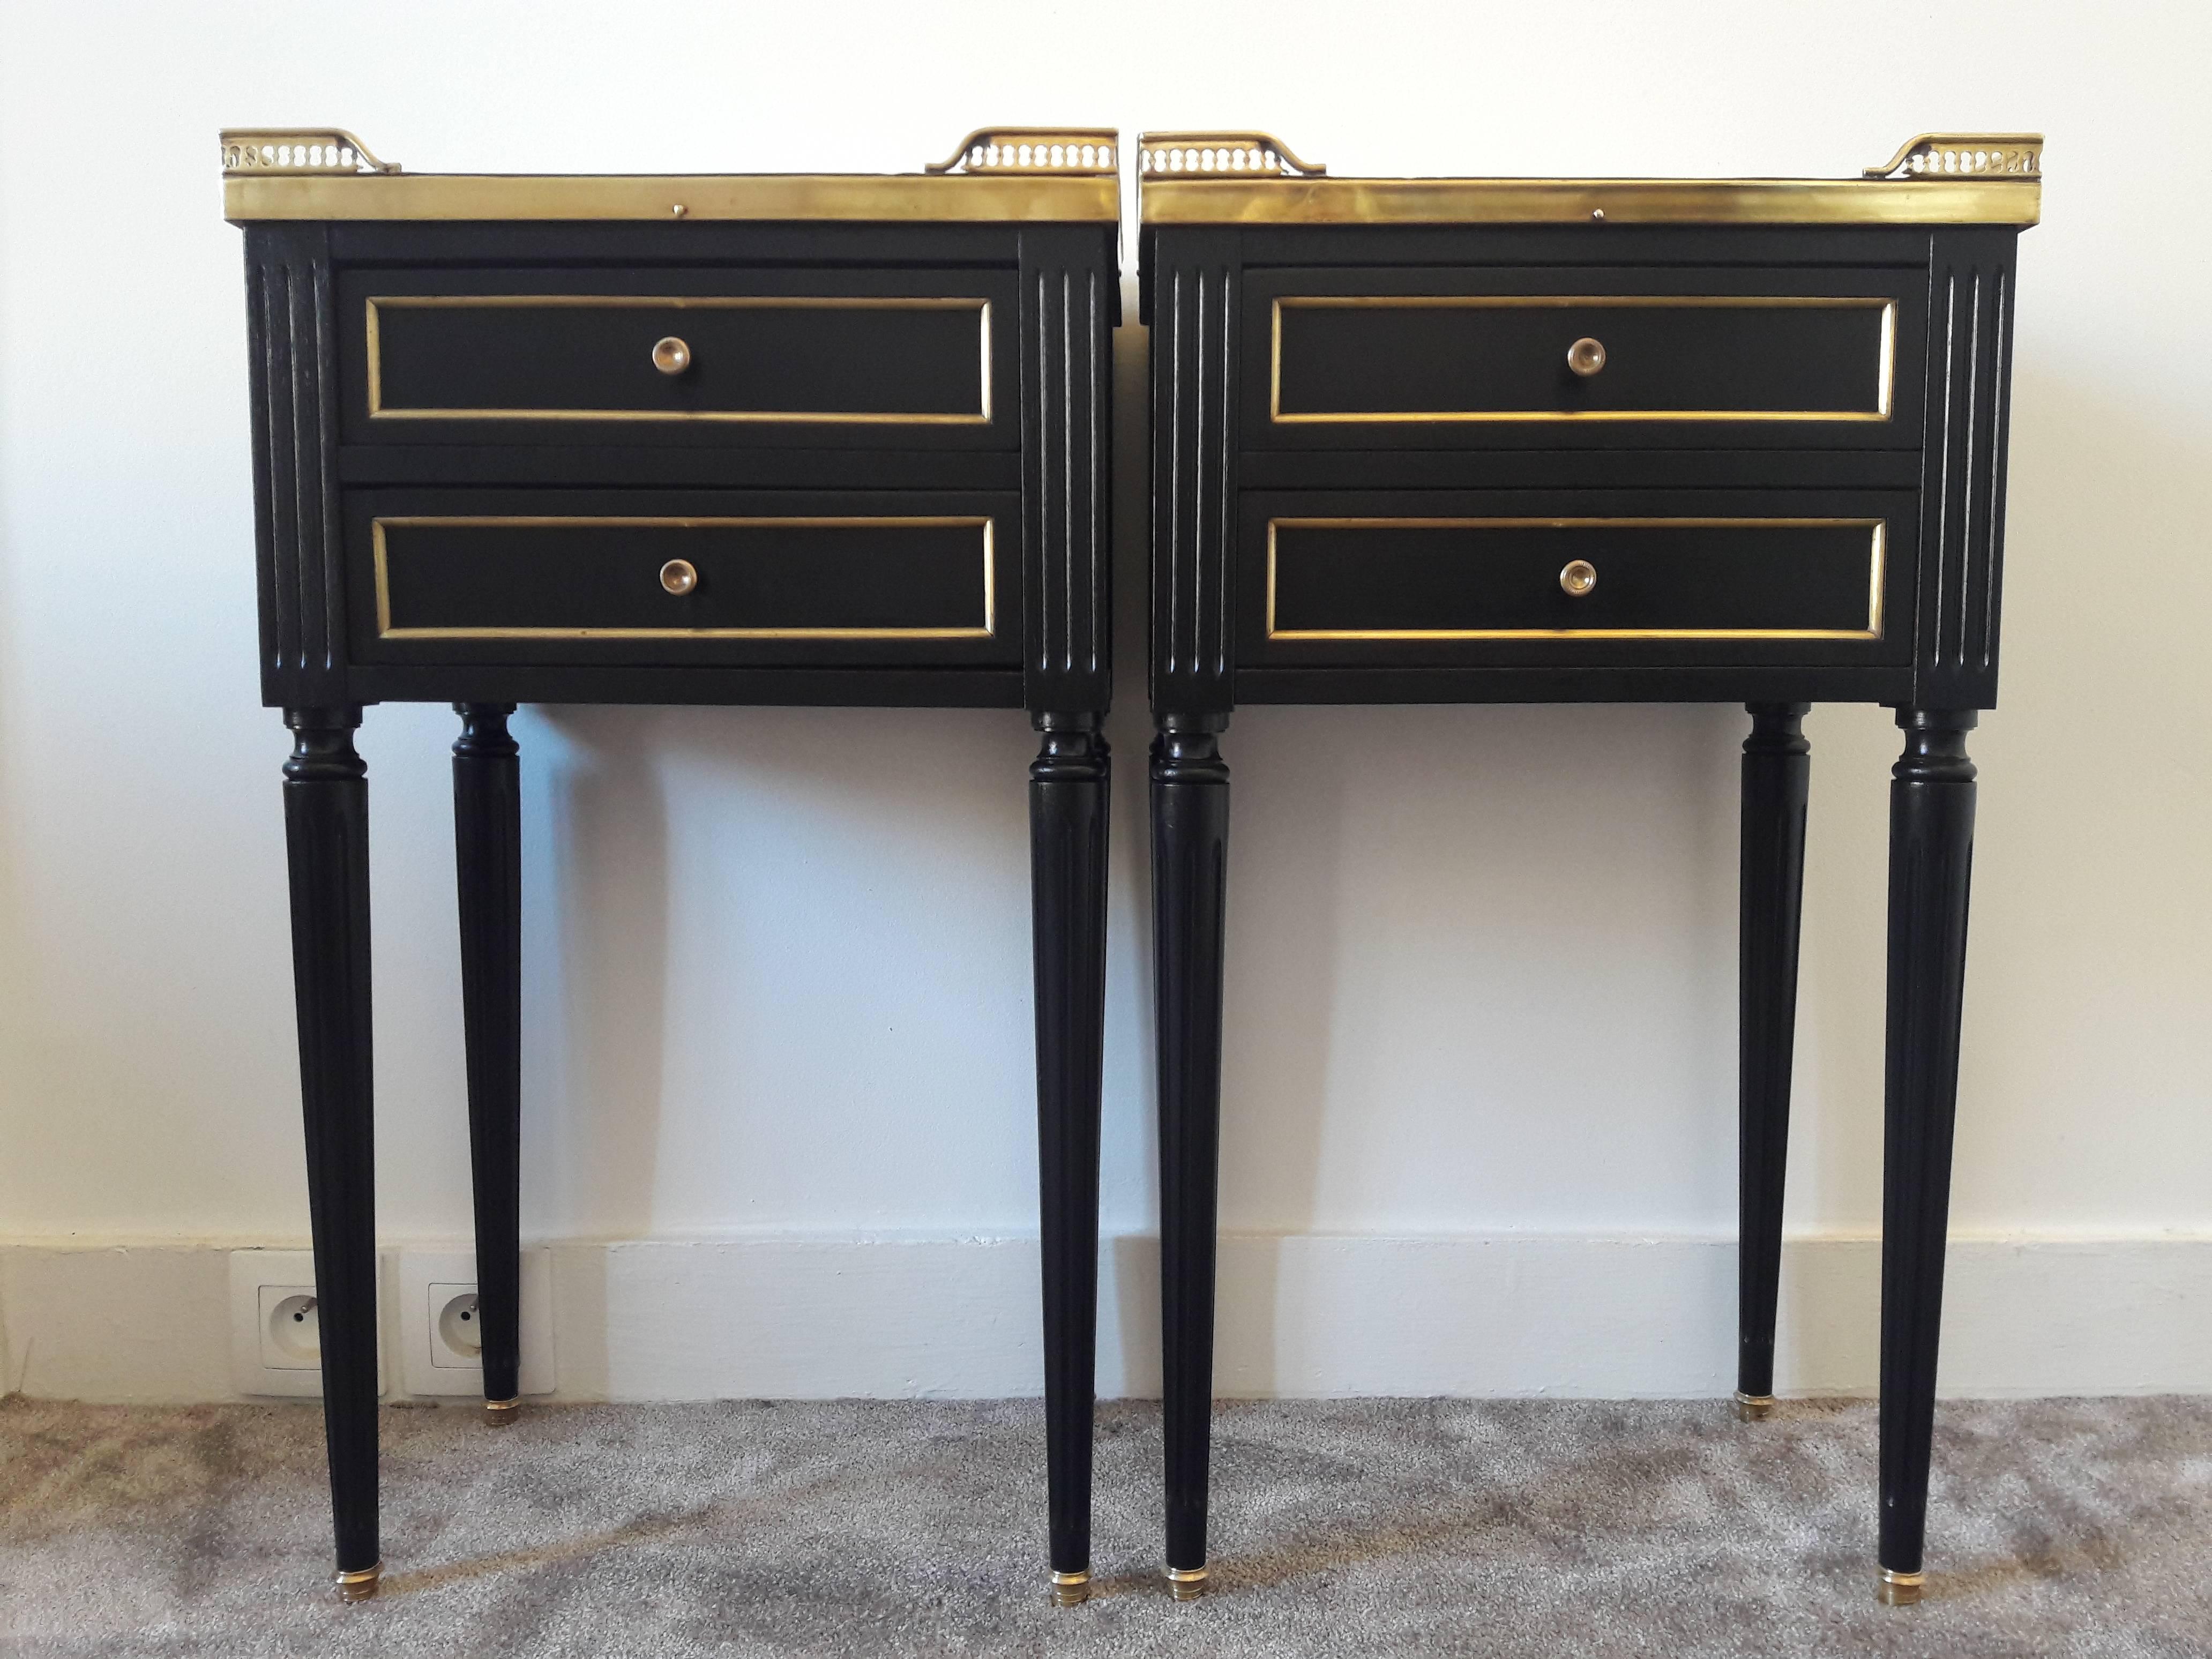 Antique French Louis XVI style pair of nightstands topped with a white Carrara marble, fluted legs finished with golden bronze clogs. Two dovetailed small drawers with brass details.